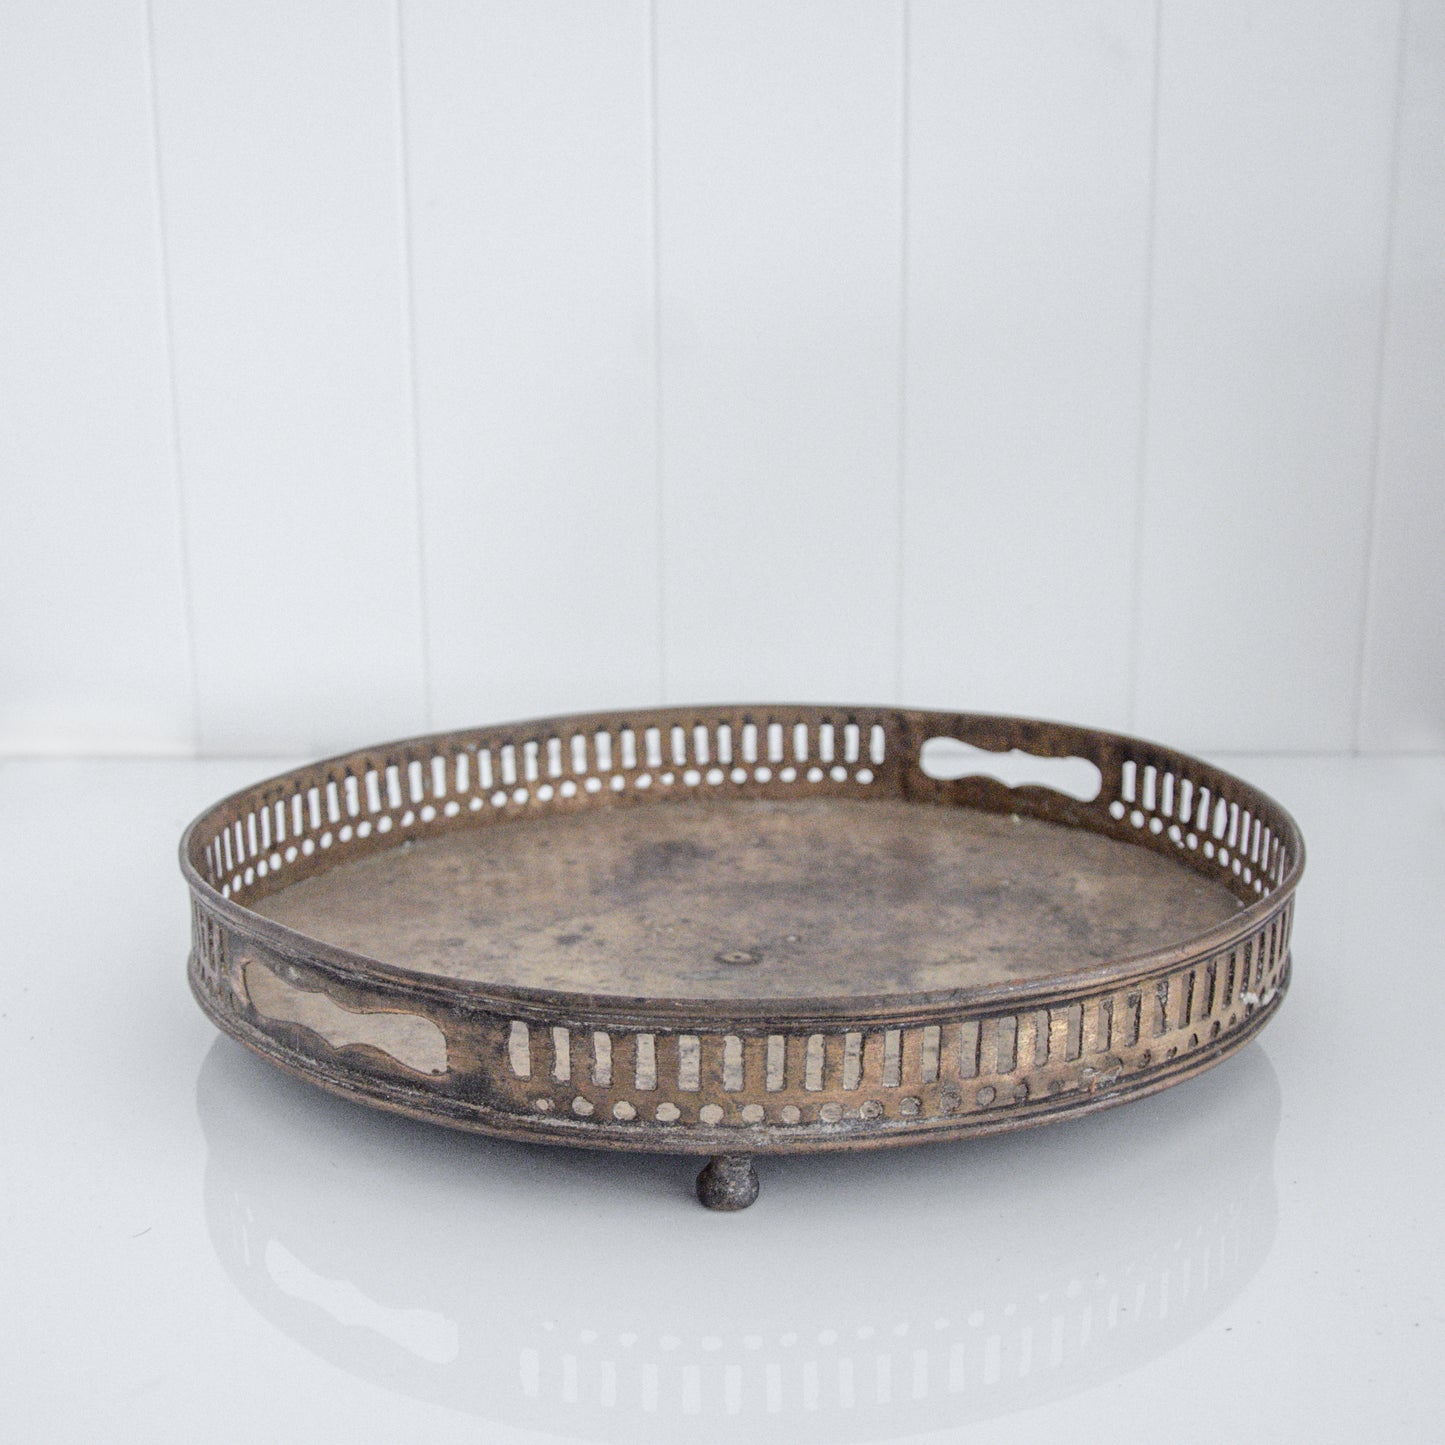 ANTIQUE BRASS SERVING TRAY